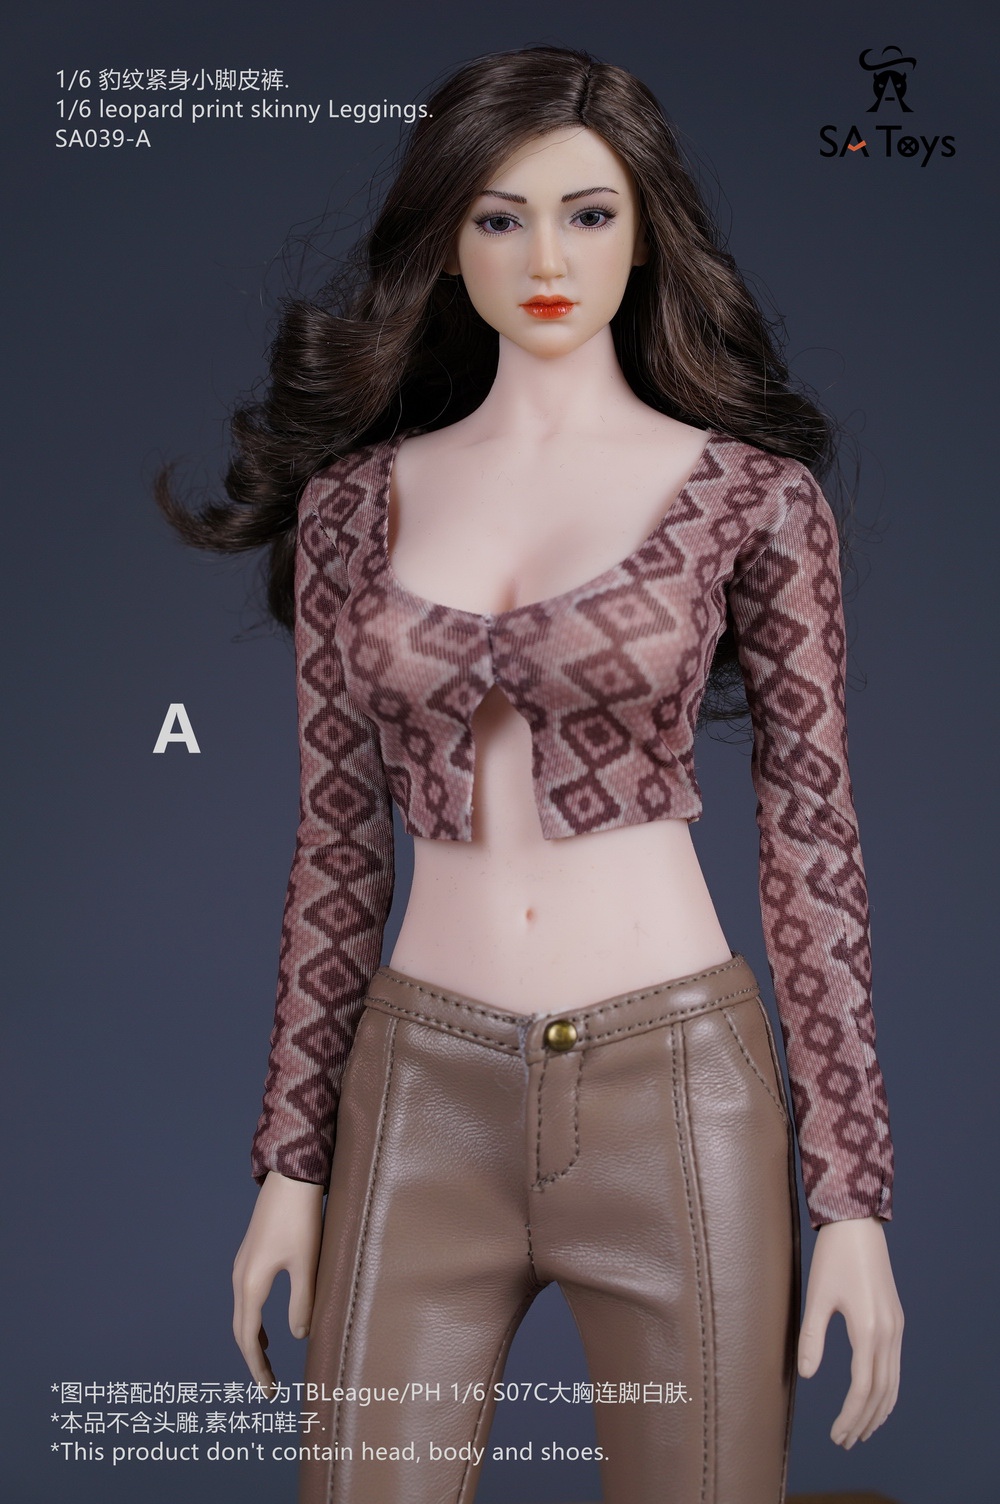 SAToys - NEW PRODUCT: SA Toys: 1/6 Lantern Sleeve Leather Pants, Leopard Printed Leather Pants, Printed Backless Dresses (Multiple Options) 10584812